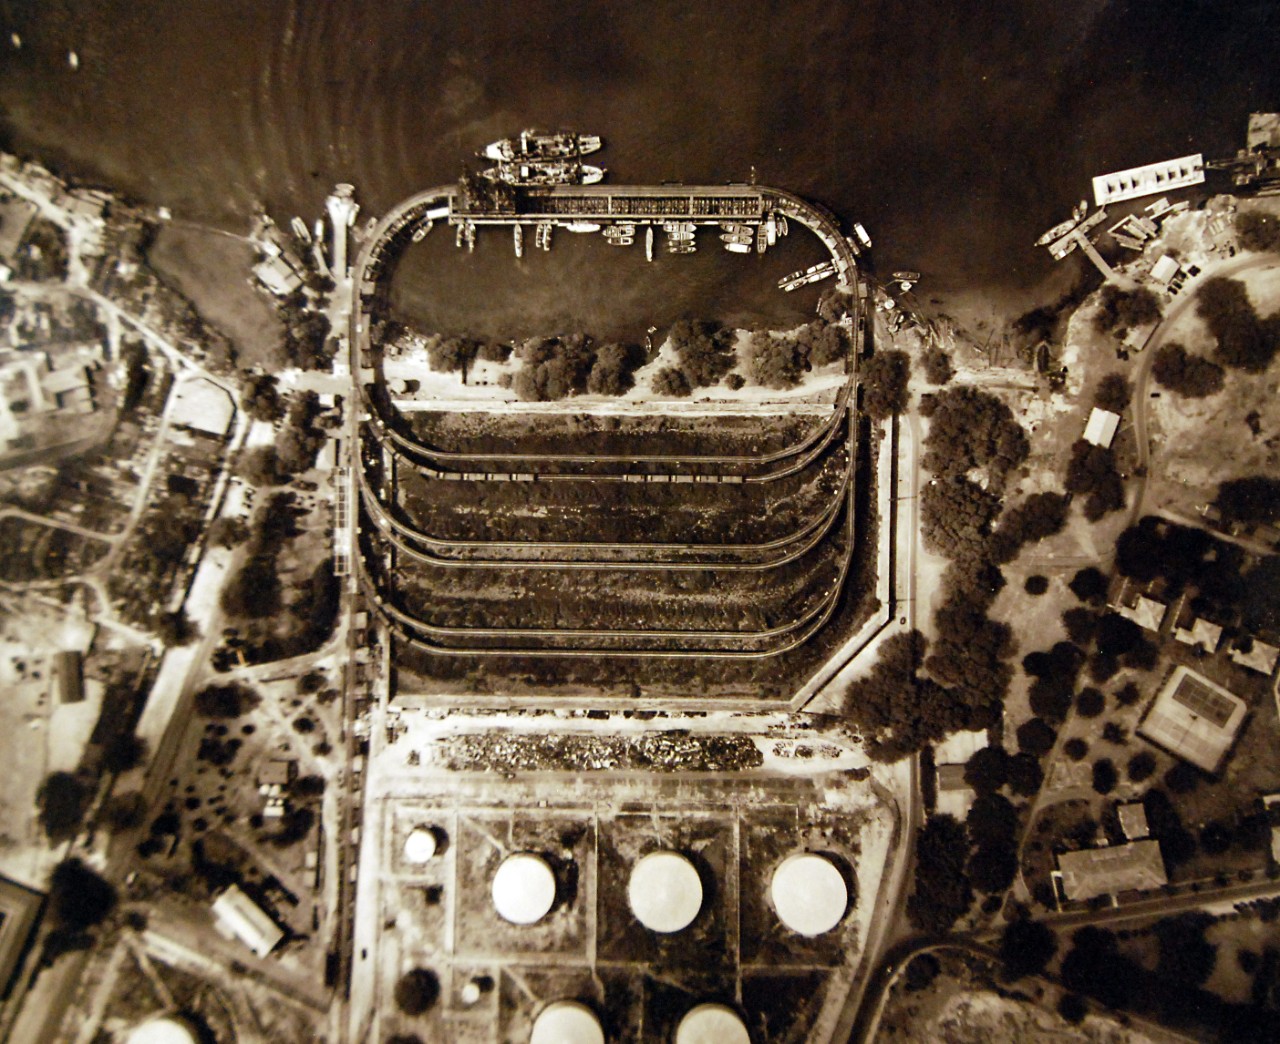 80-G-451121:   Pearl Harbor Navy Yard, Oahu, Territory of Hawaii, aerial view shows fuel depot and coal docks, October 16, 1941.   Official U.S. Navy photograph, now in the collections of the National Archives.  (2016/09/20).